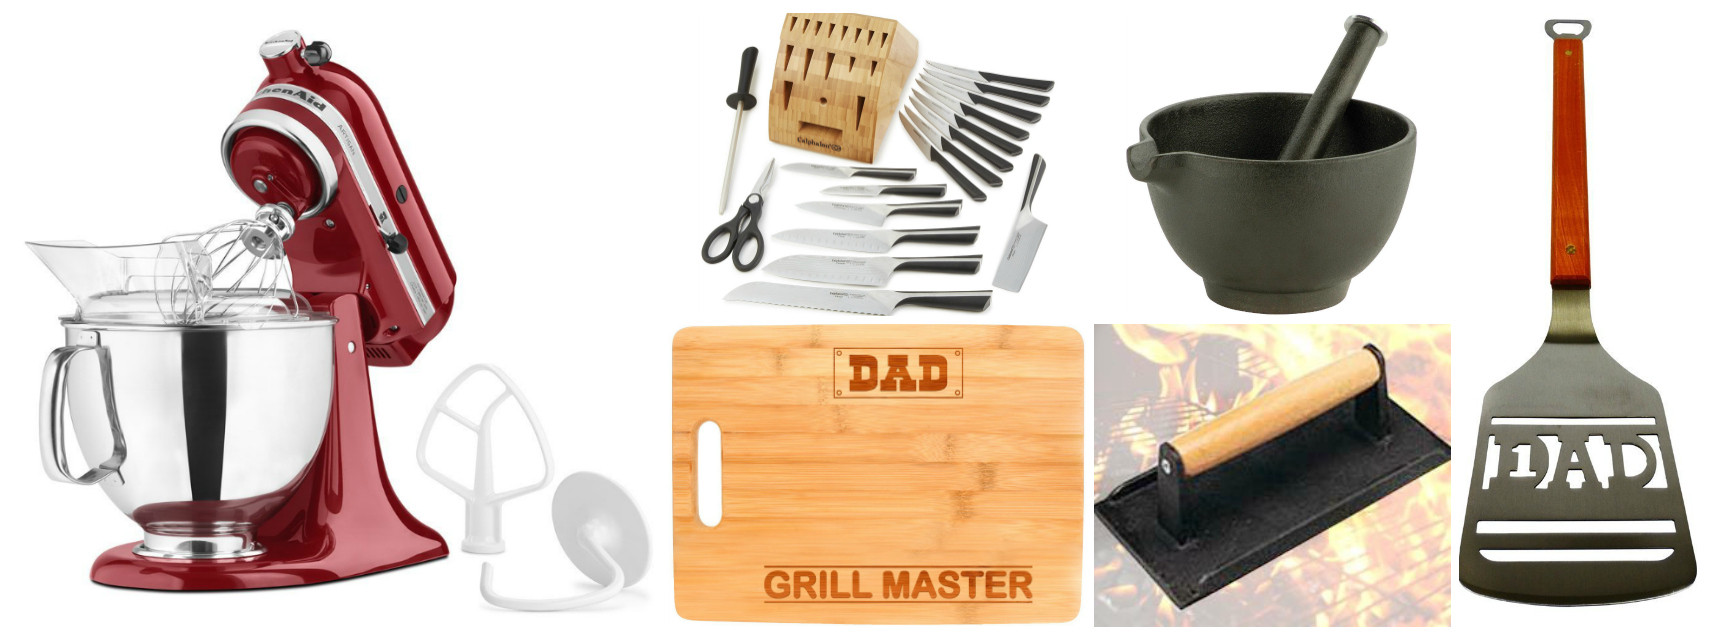 Personalized Father'S Day Gift Ideas
 60 Unique Father s Day Gift Ideas Family Fresh Meals